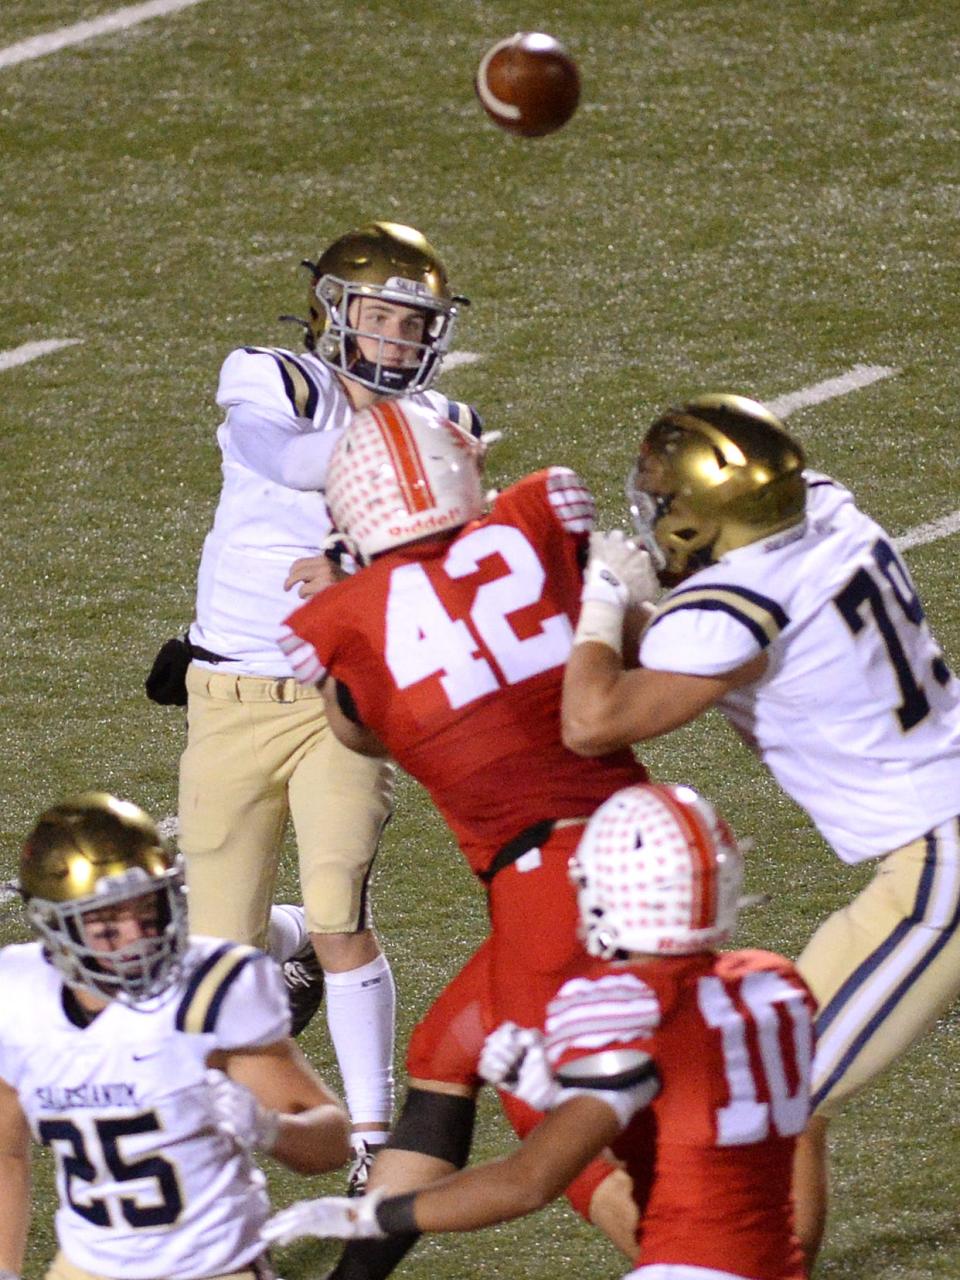 Salesianum quarterback Ryan Stoehr manages to get off a long pass before being hit by Smyrna defender Nate Chandler.